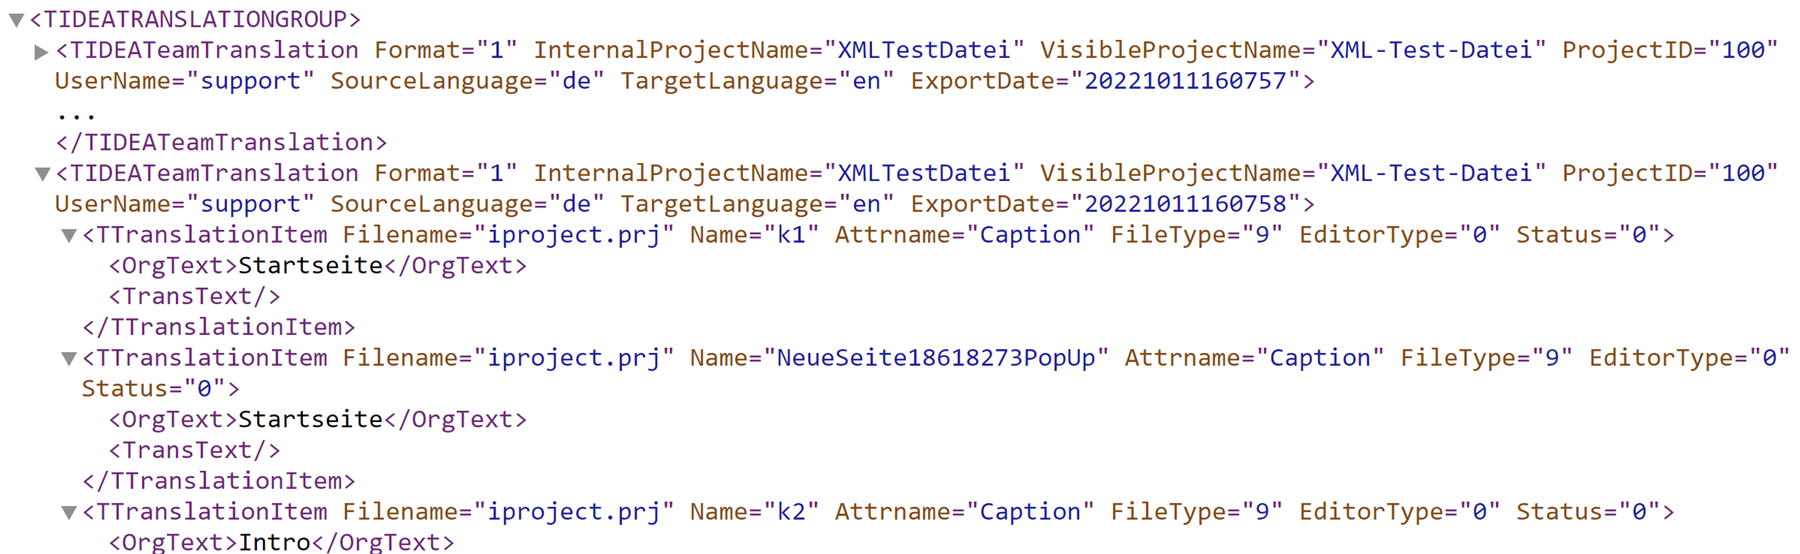 XML code snippet from Trados Studio with elements TIDEATeamTranslation and TTtranslationItem, attributes for format, project name, username, source and target languages.